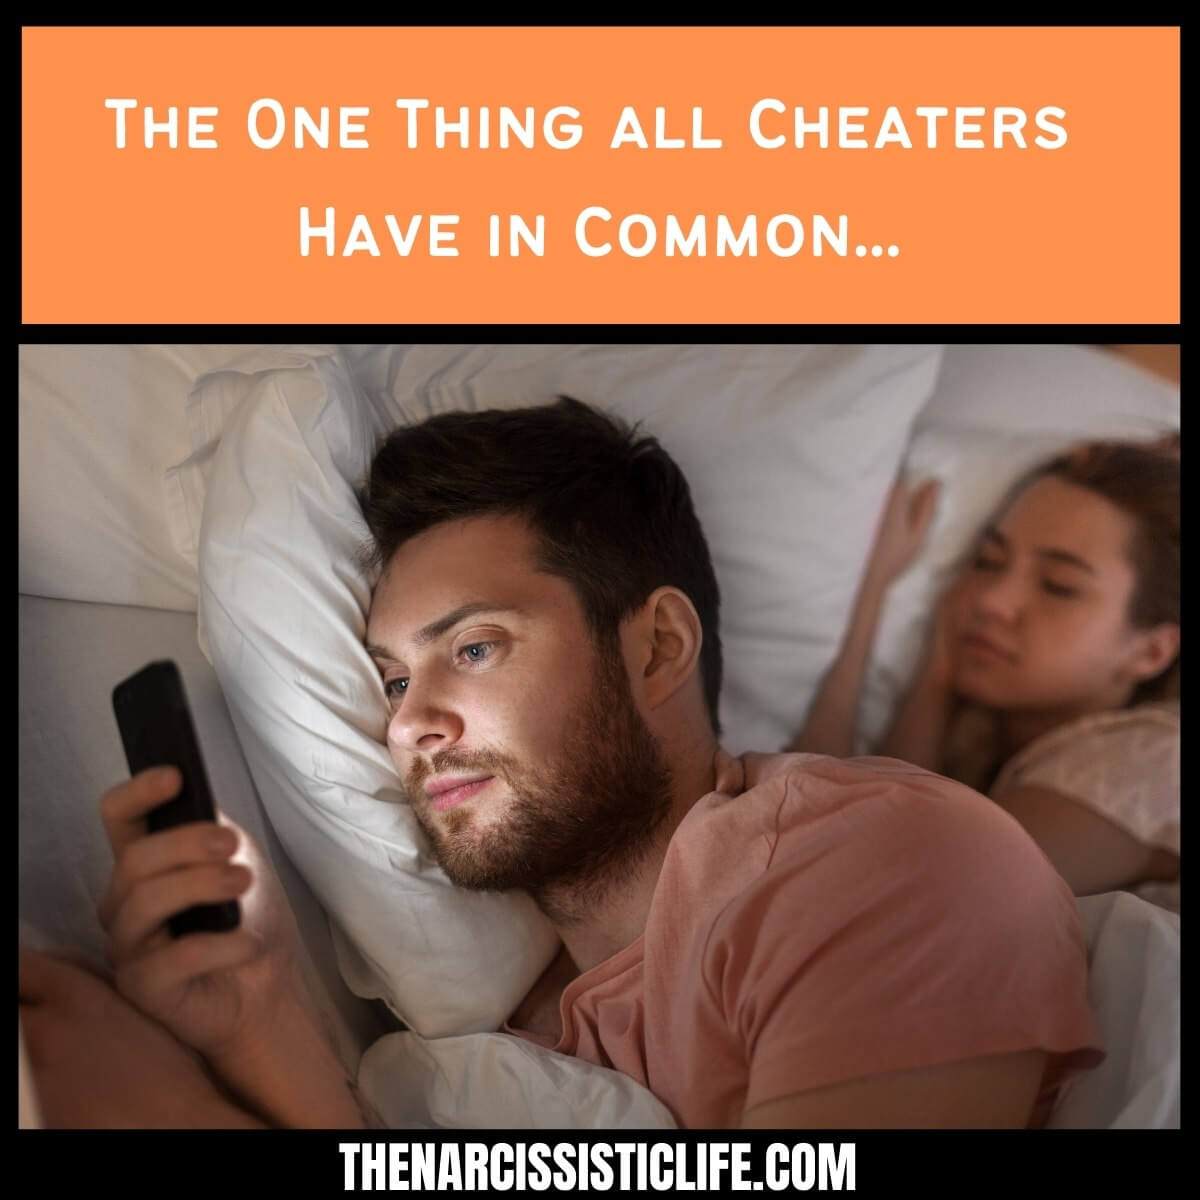 The One Thing all Cheaters Have in Common...